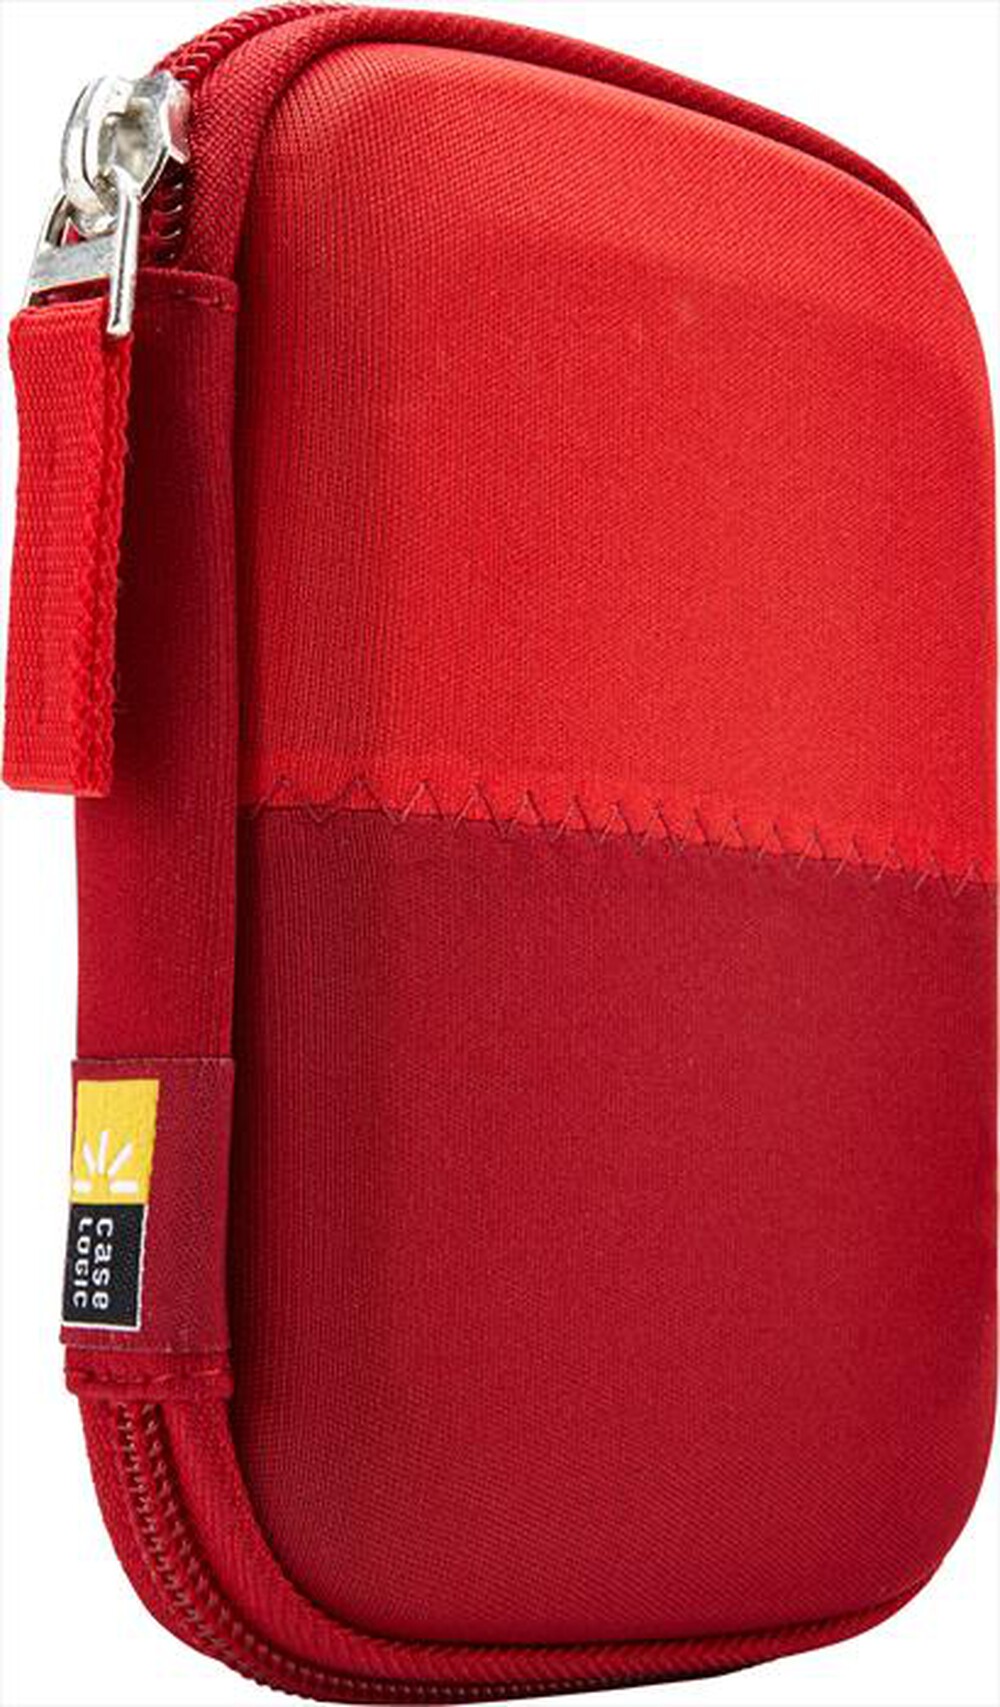 "CASE LOGIC - HDC-11 RED-ROSSO"